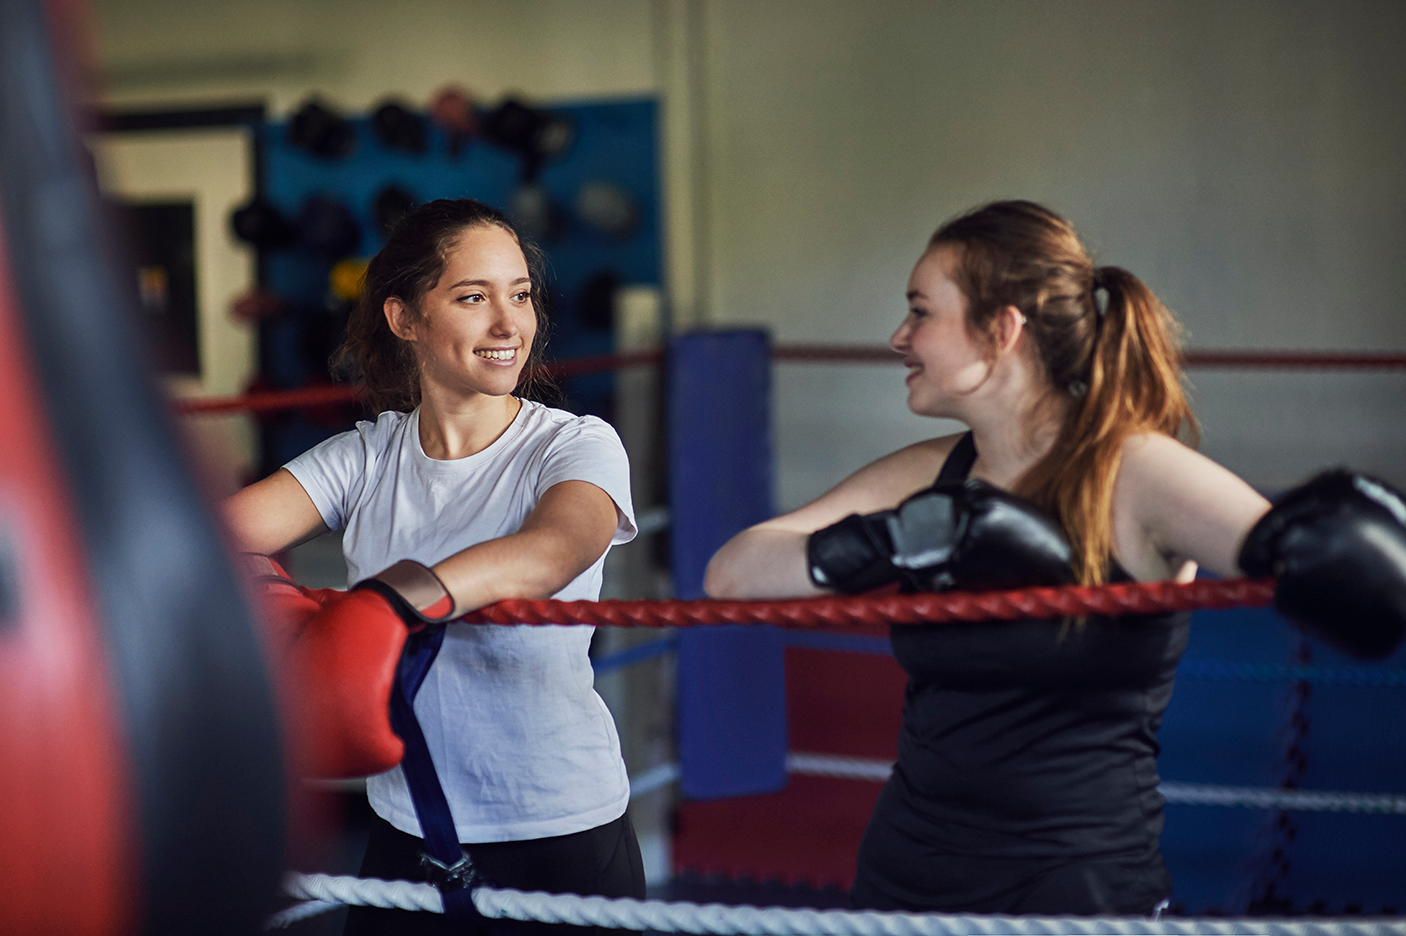 Young female boxers leaning against boxing ring ropes chatting - stock photo